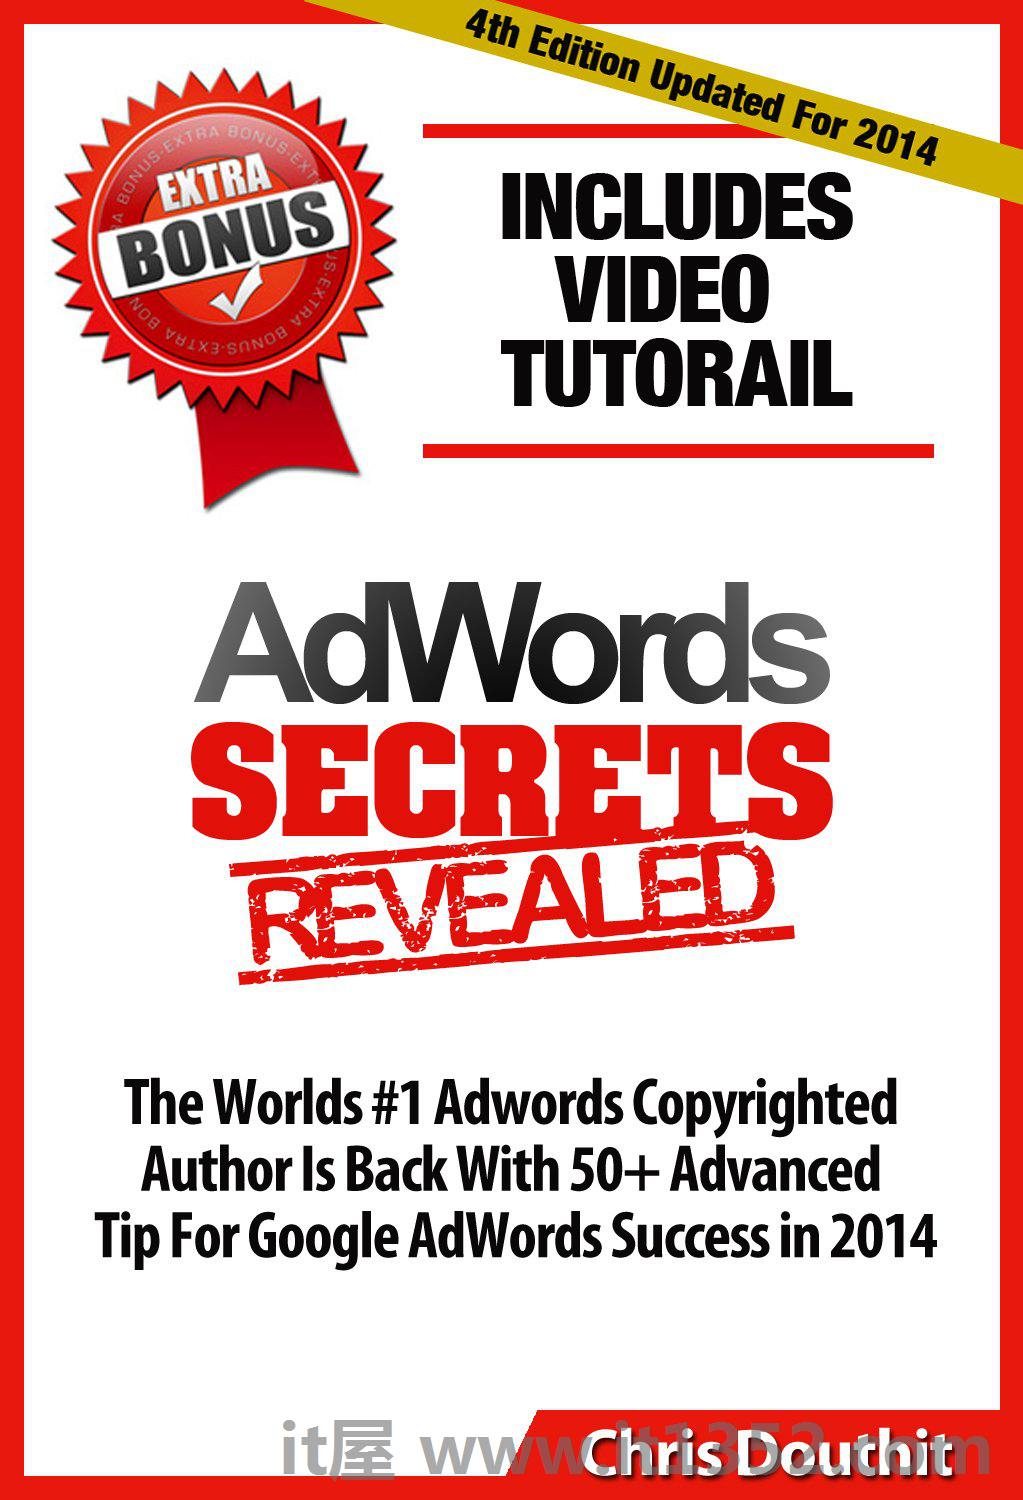 AdWords Secrets Revealed: The Complete Guide To Google AdWords Pay Per Click and PPC Marketing